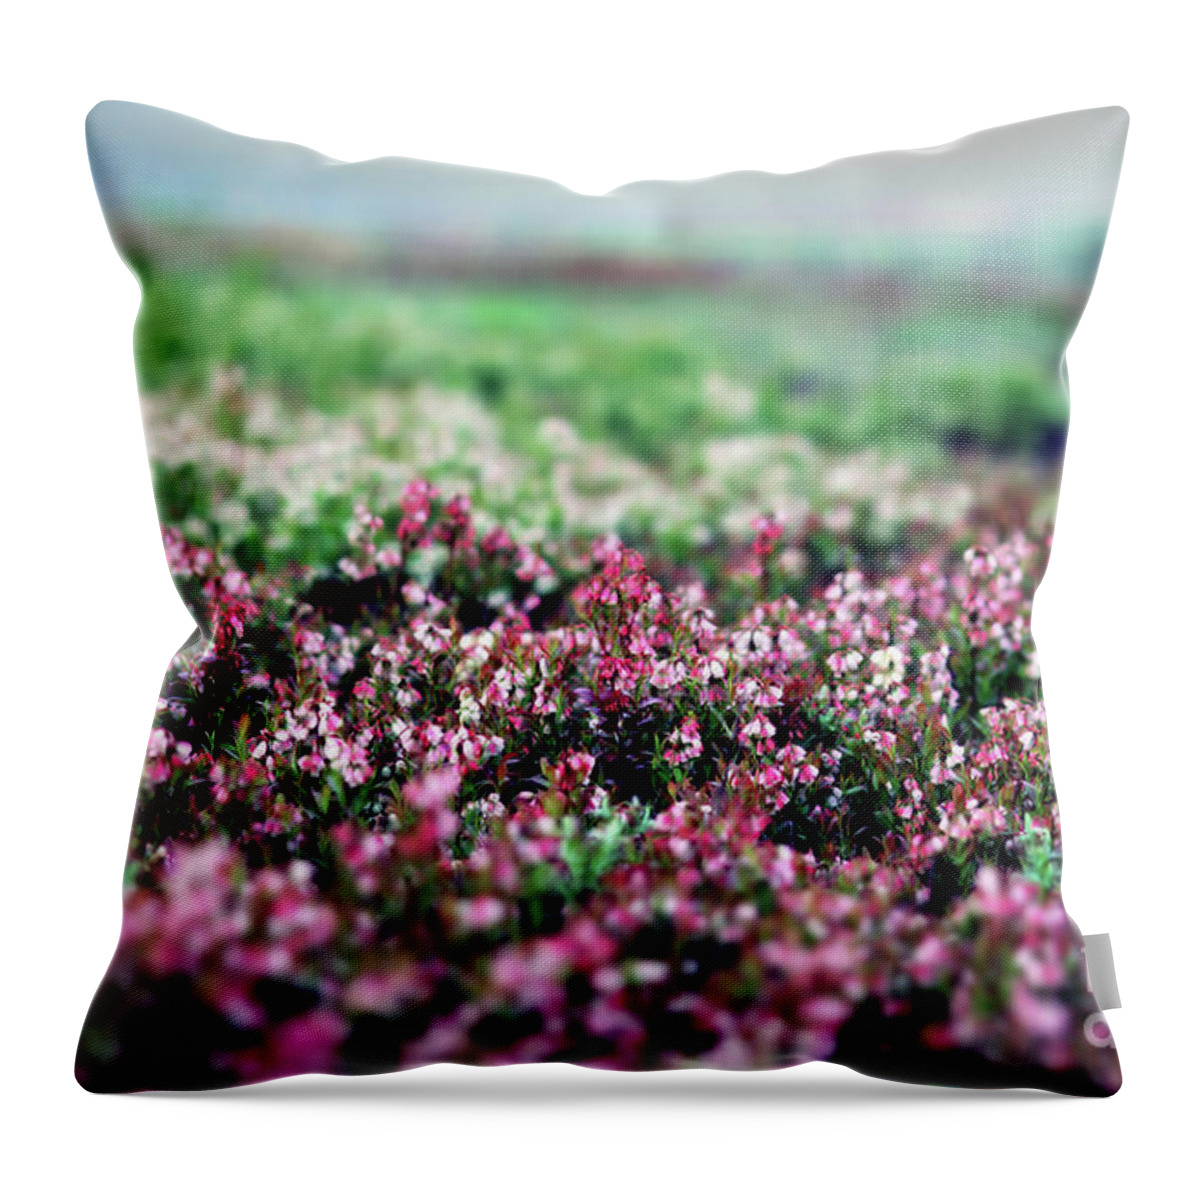 Maine Throw Pillow featuring the photograph Blueberry Blossoms by Alana Ranney